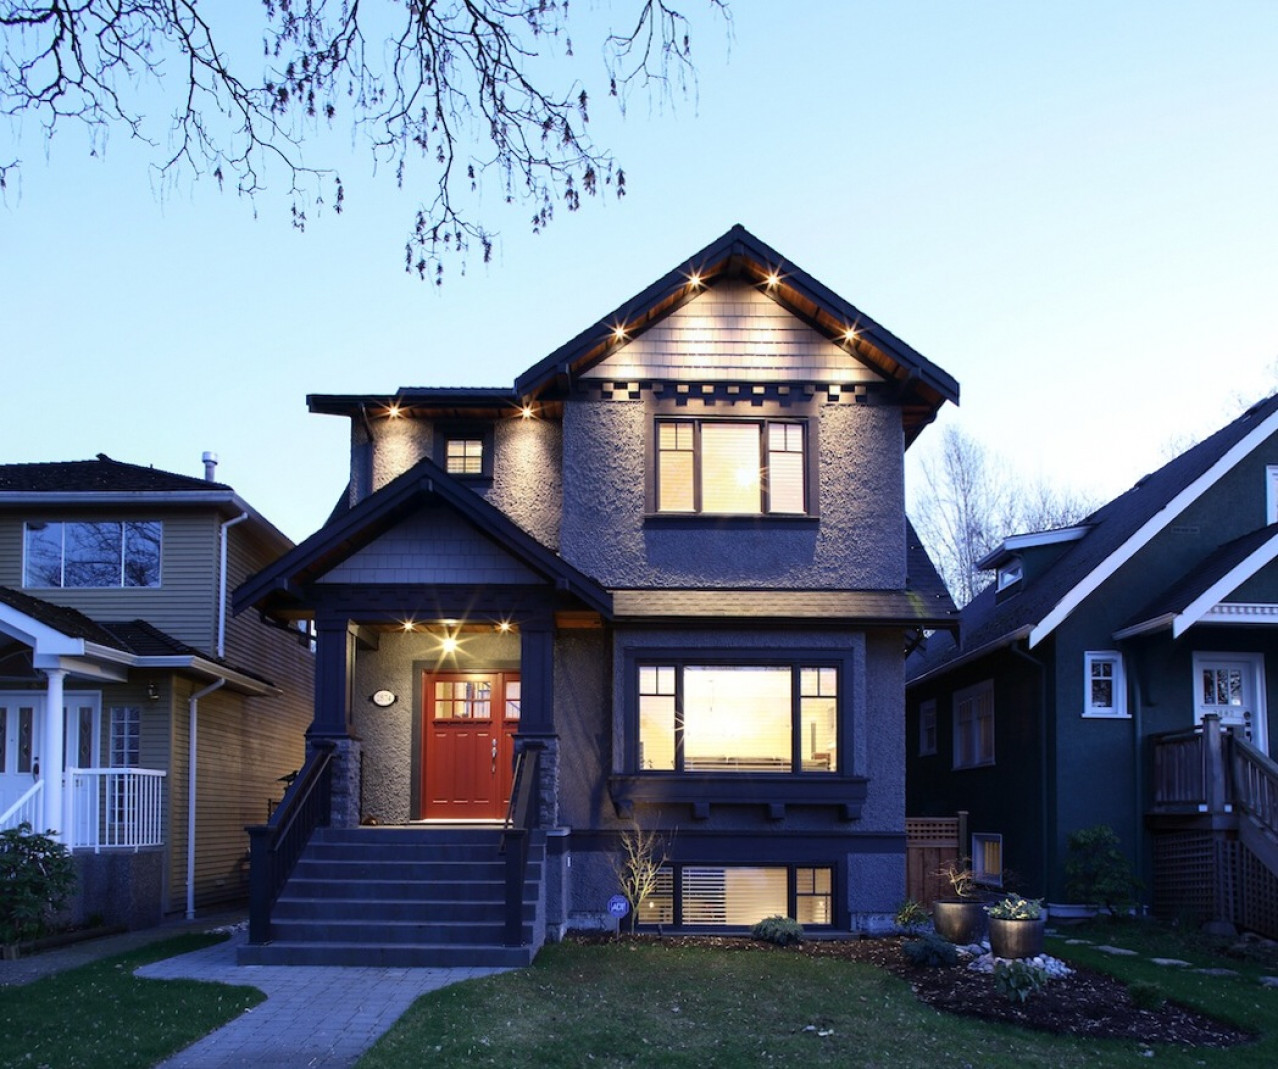 West 11th Avenue, Vancouver Custom Homes